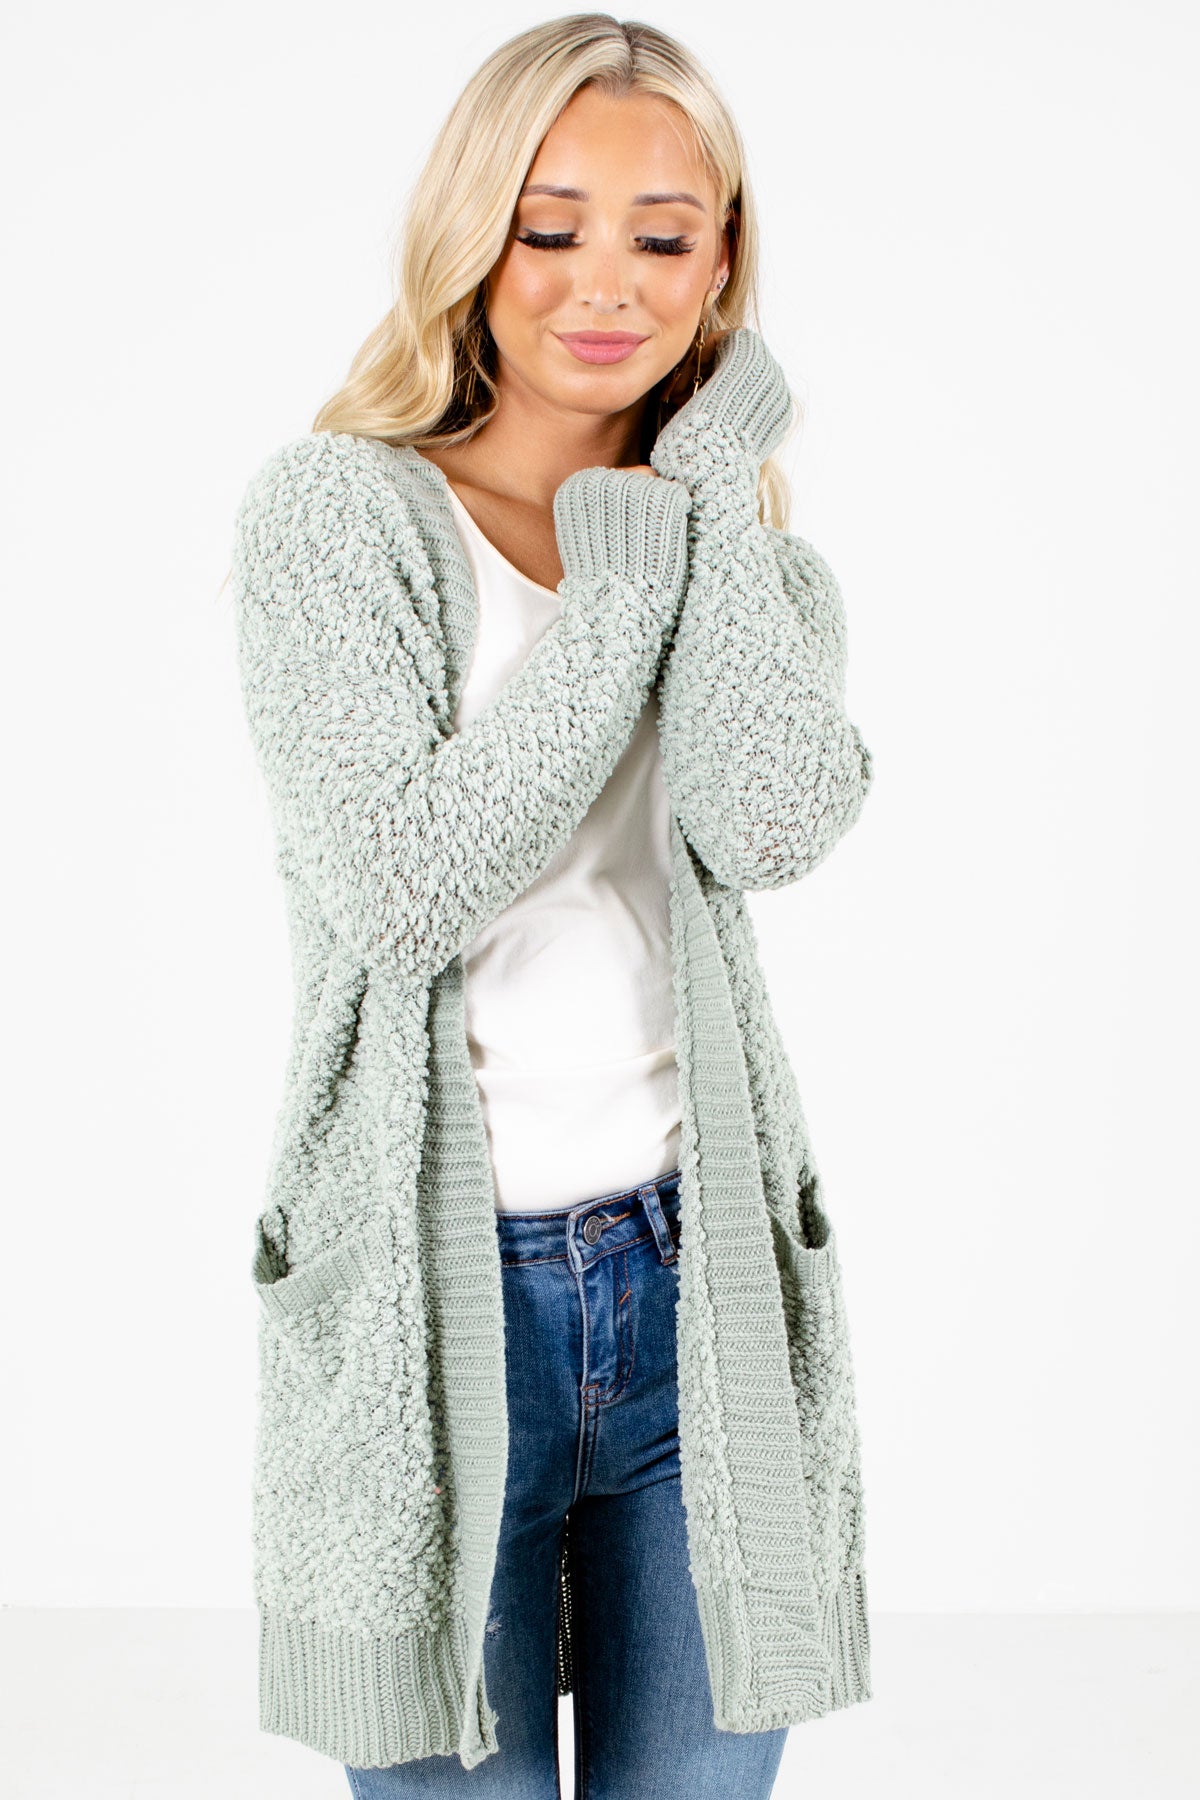 Sage Green Soft Boutique Cardigans for Women